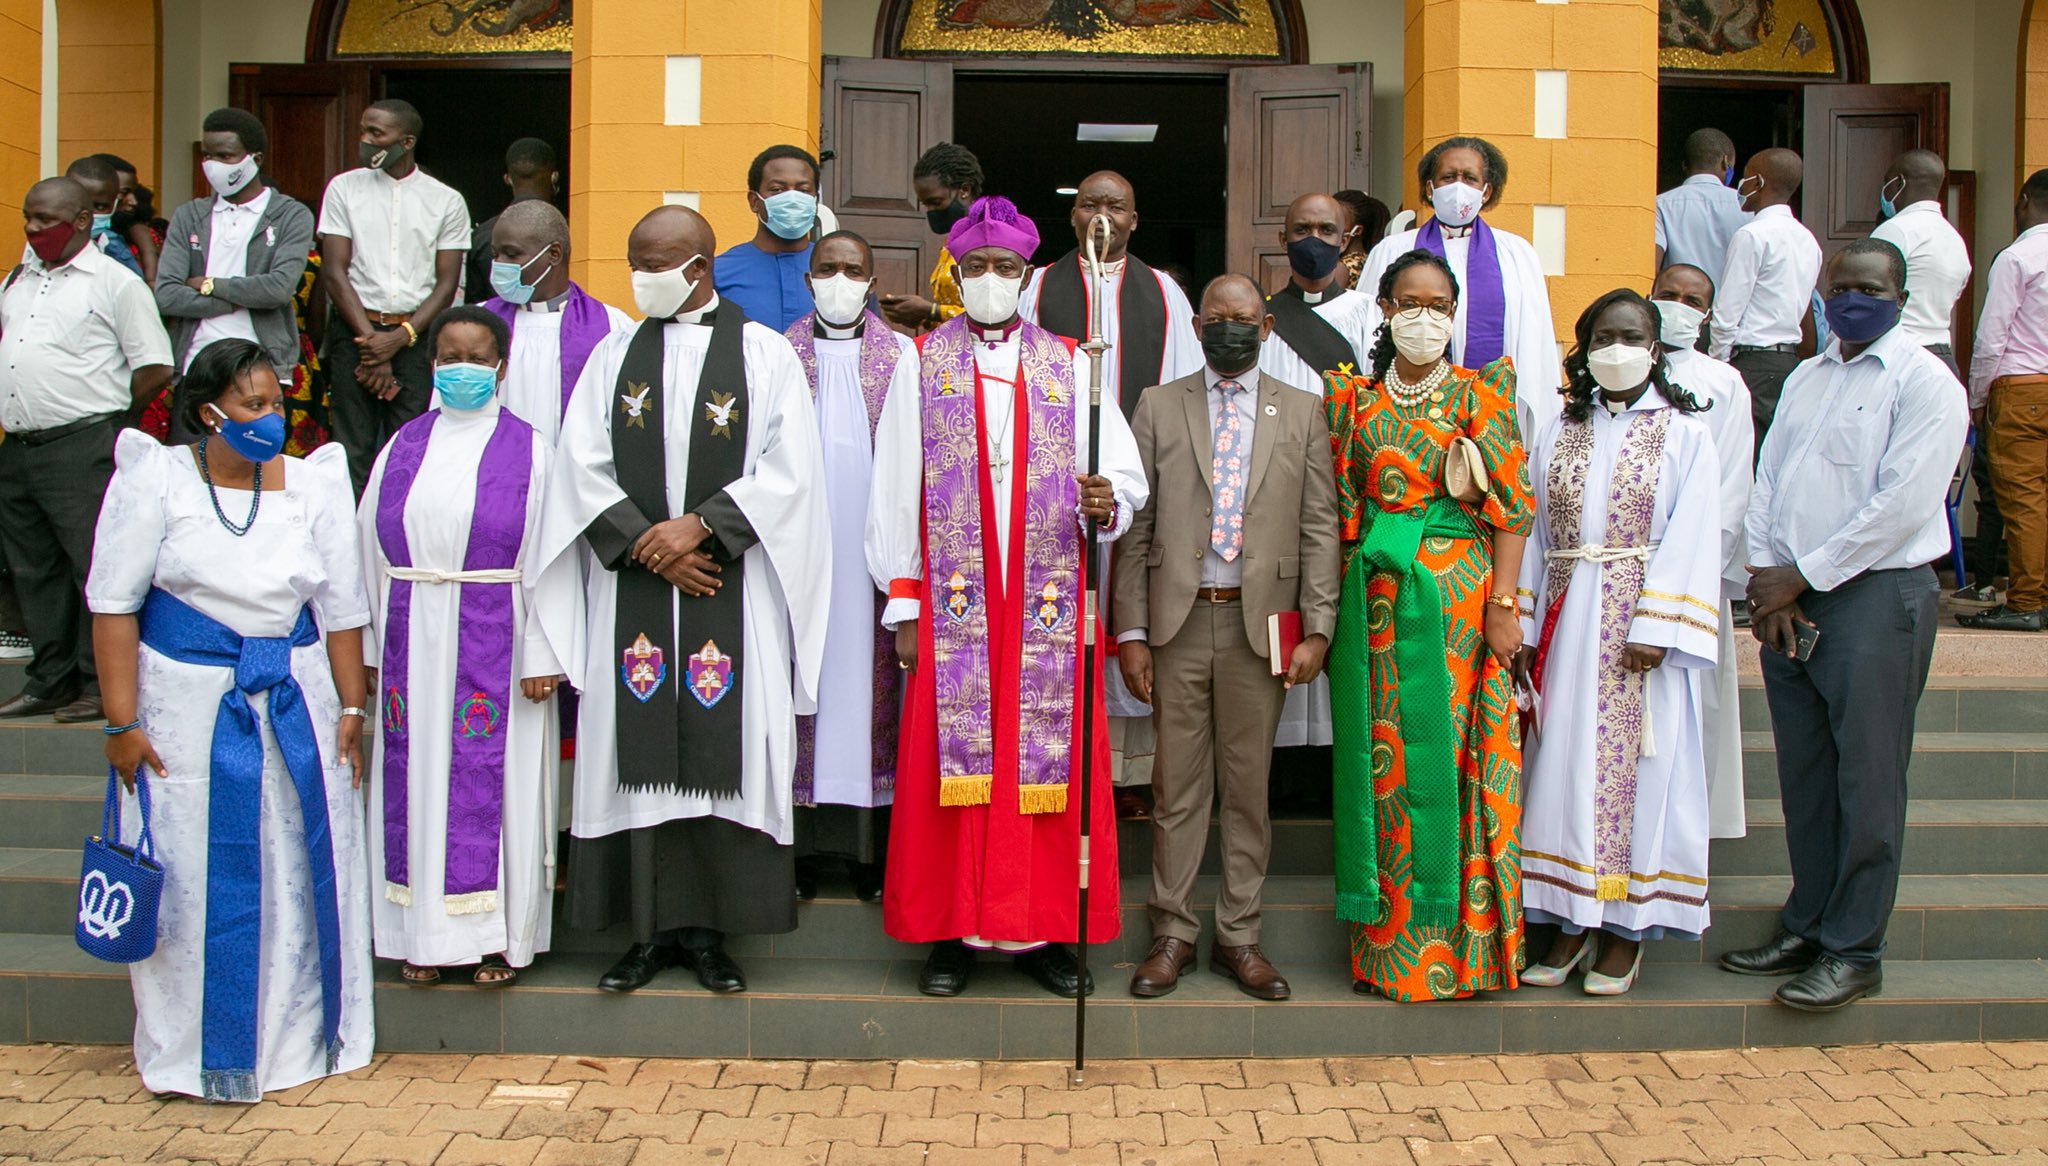 The Archbishop of the Church of Uganda-Rt. Rev. Dr. Stephen Kaziimba Mugalu (4th L) with the Vice Chancellor-Prof. Barnabas Nawangwe and his wife (4th R and 3rd R), St Francis Chaplain-Rev. Can. Onesimus Asiimwe (3rd L) and other members of the clergy and community after mass on 29th November 2020, St. Francis Chapel, Makerere University, Kampala Uganda.